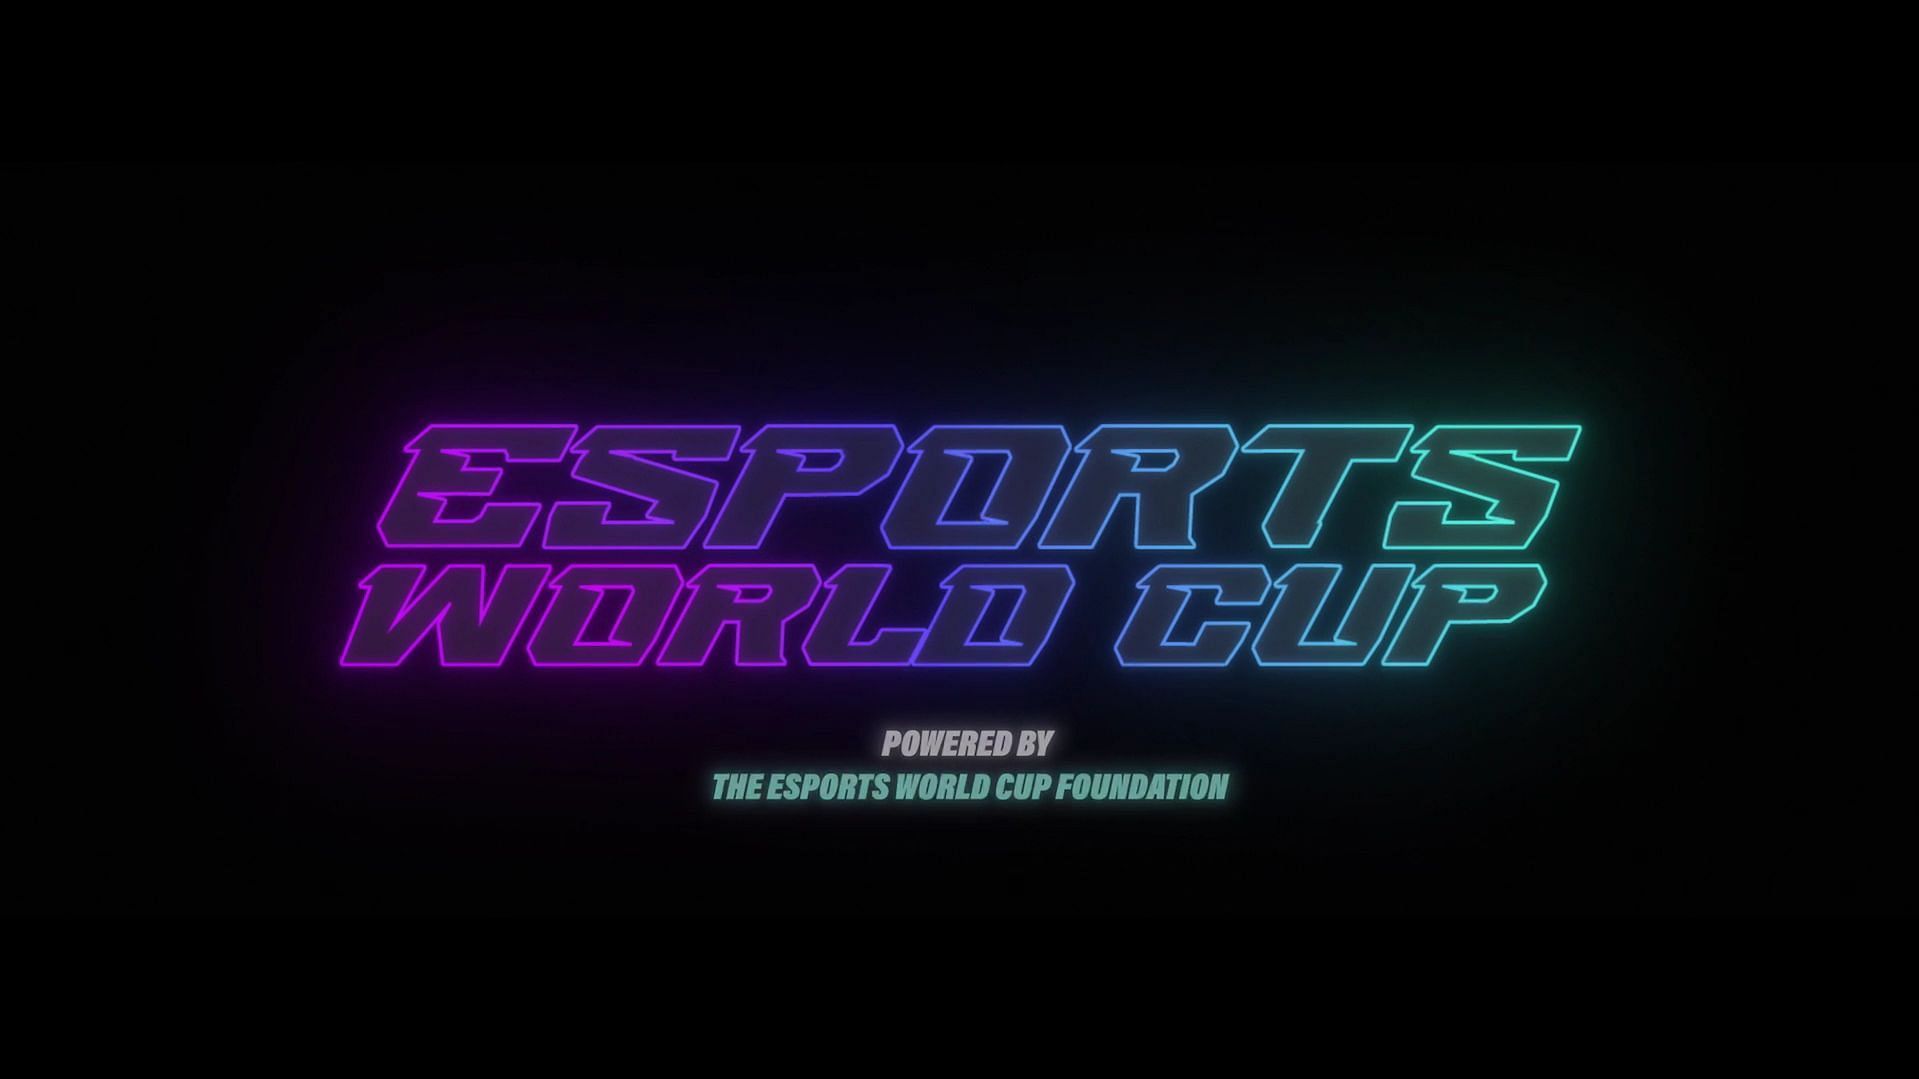 FaZe Clan reveal their roadmap for the Esports World Cup.